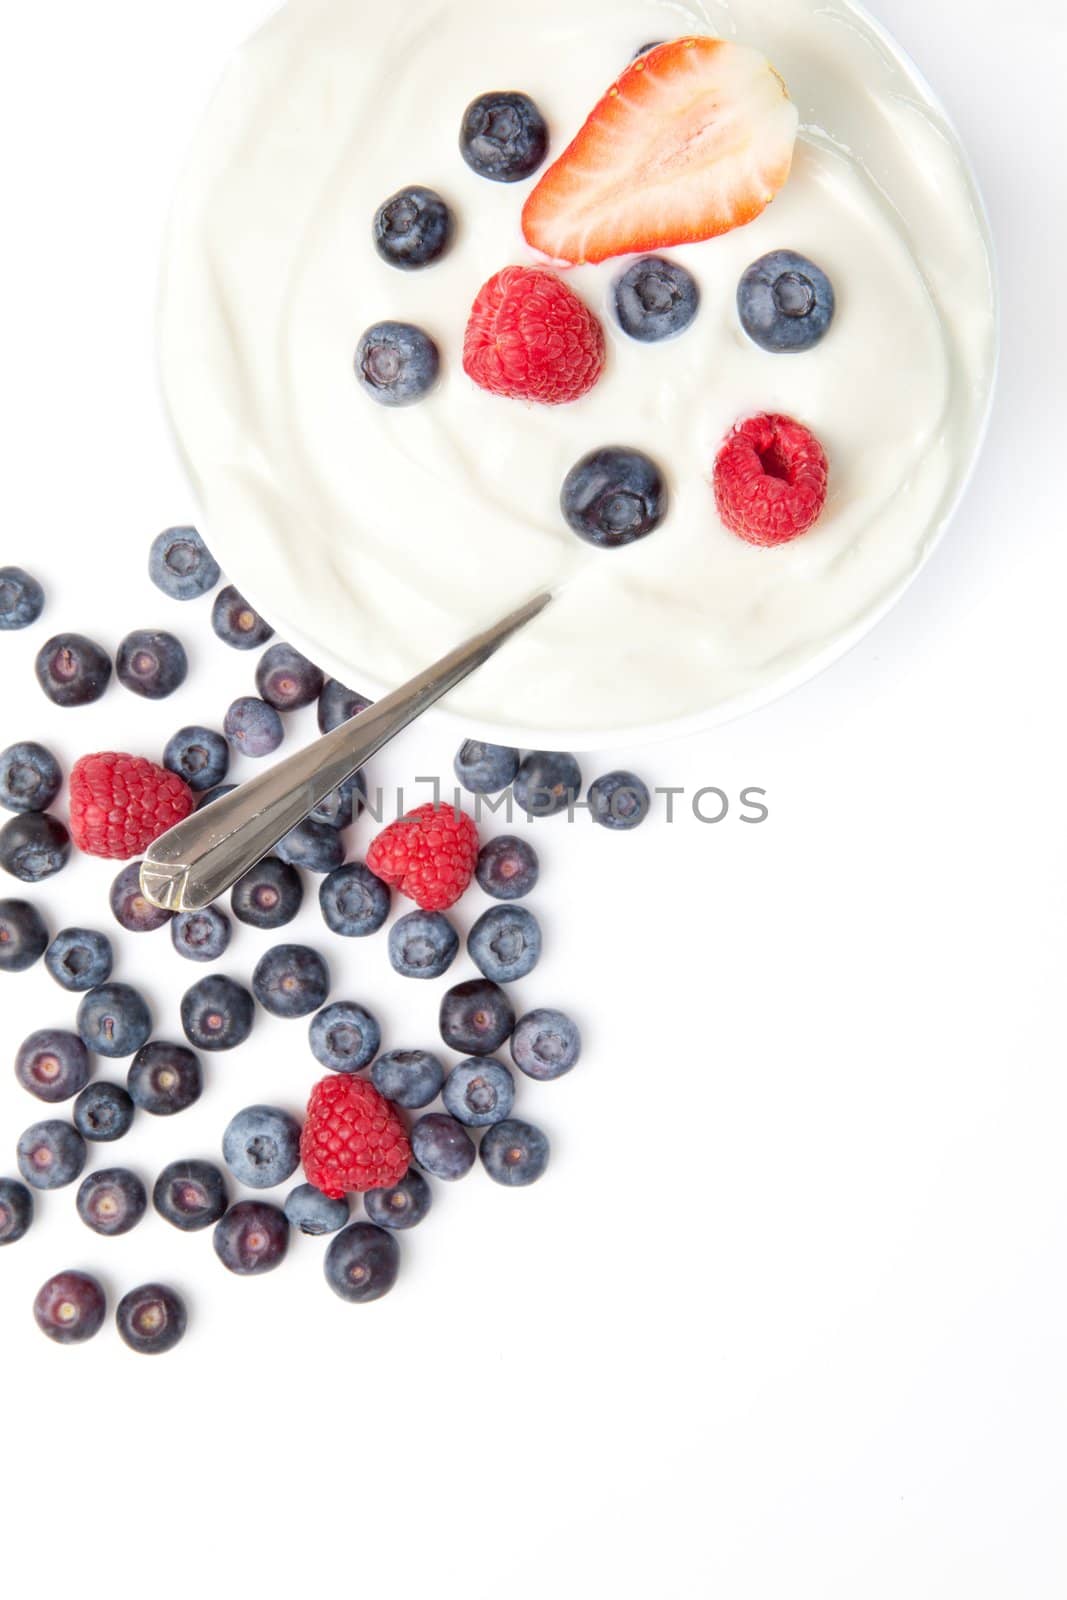 Bowl of cream with fruits  against a white background